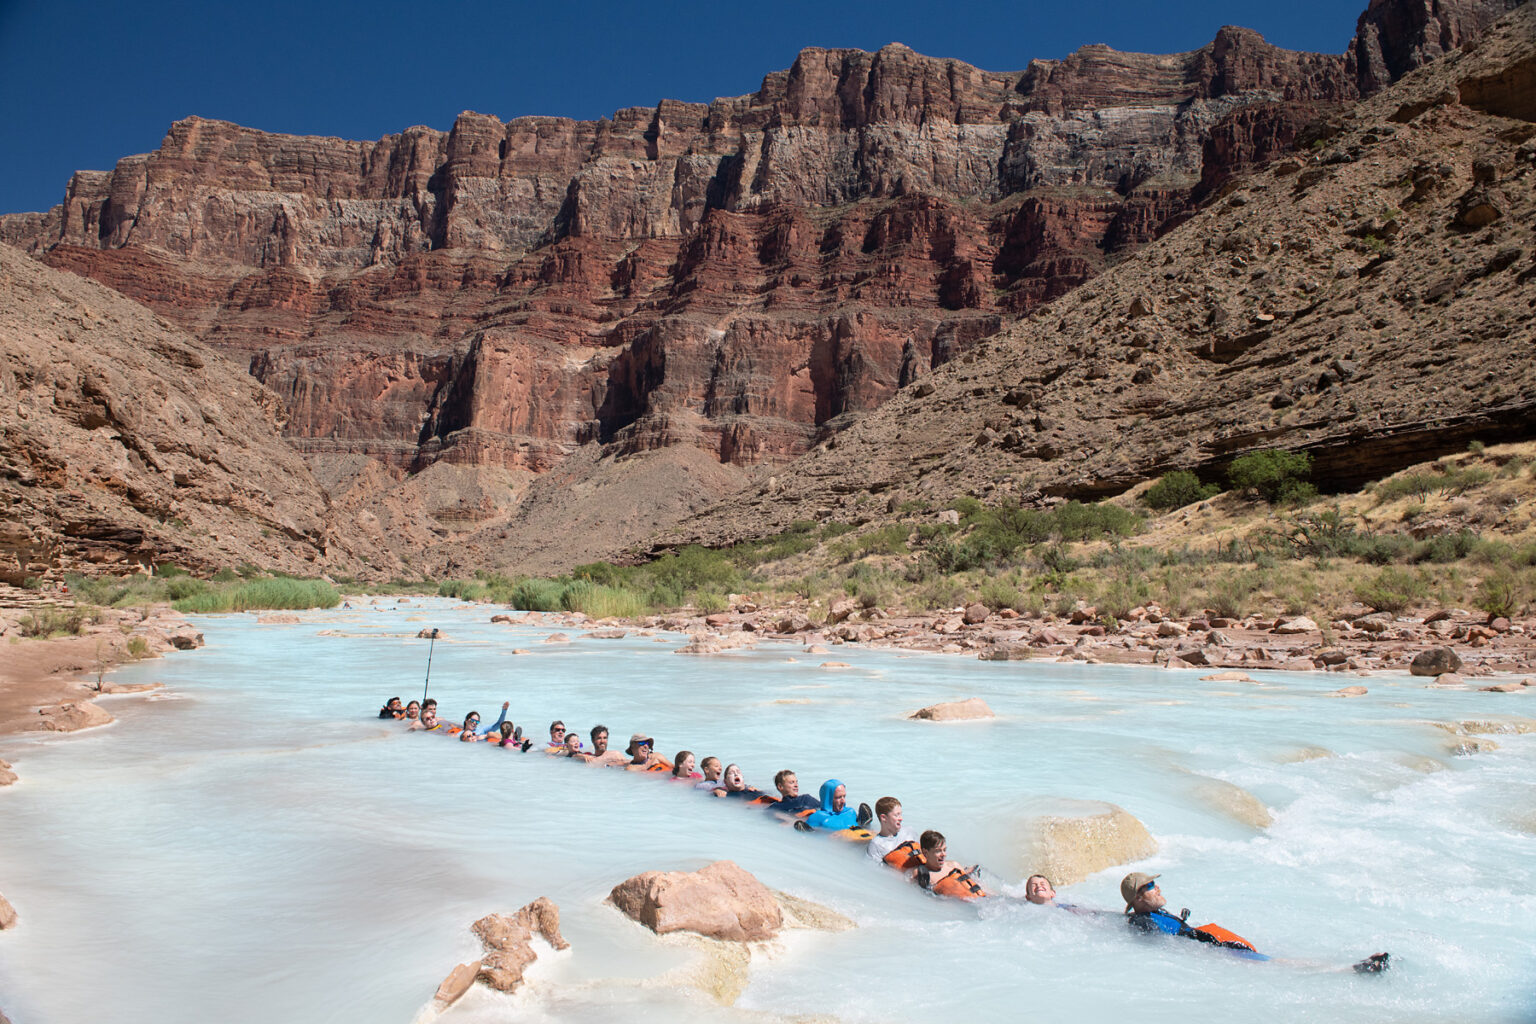 21 guides and guests link arms and legs together to form a chain and float down the azure waters of the Little Colorado River in Grand Canyon